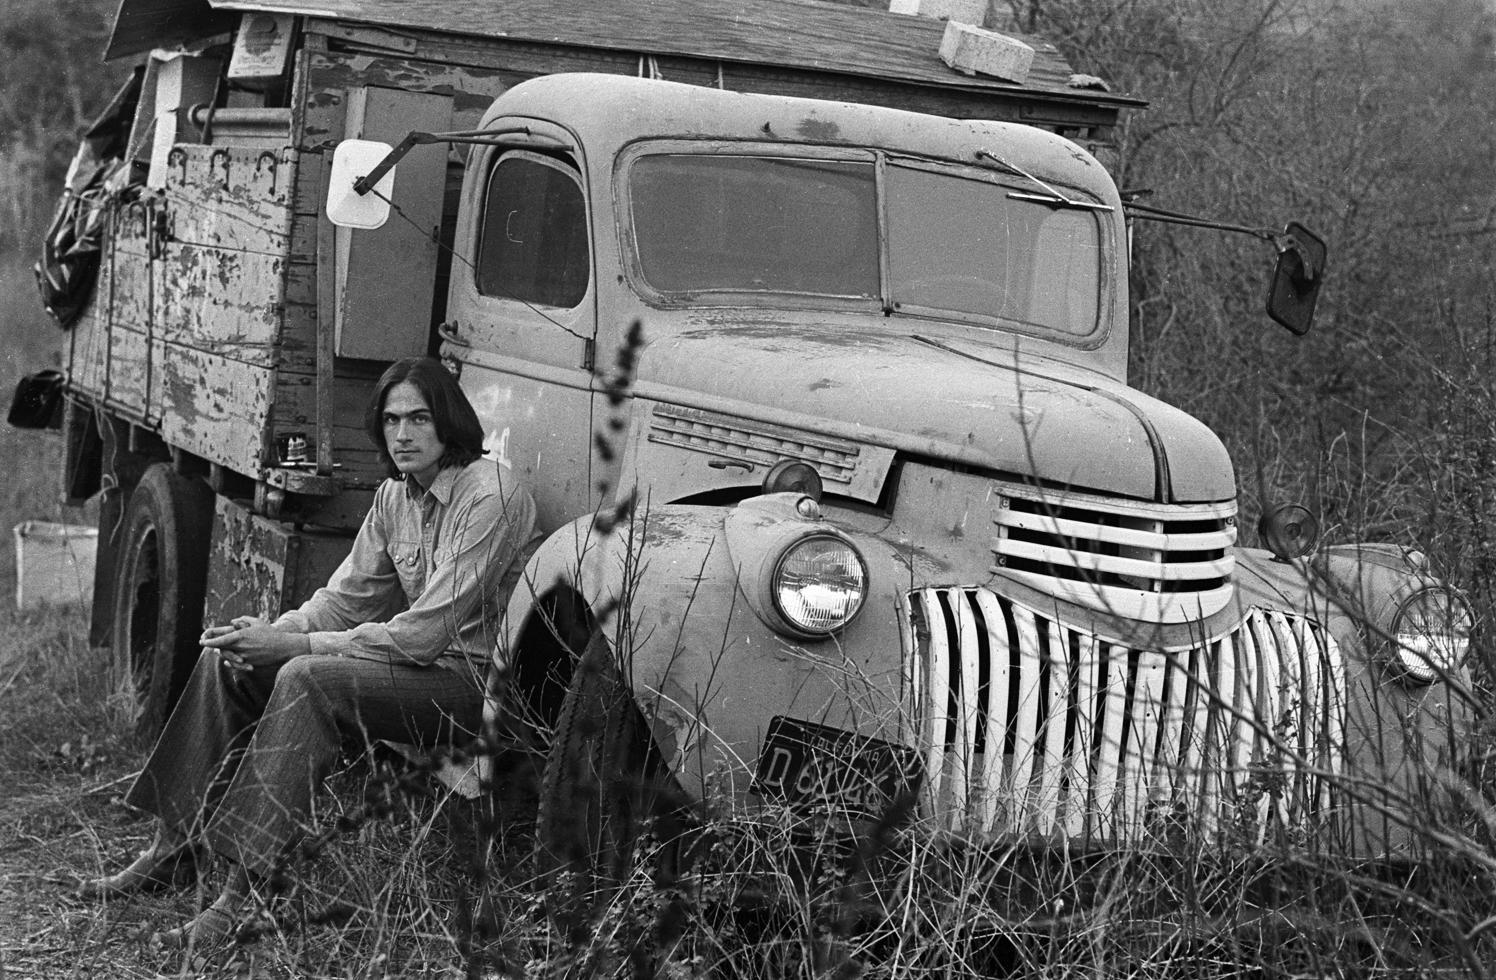 Henry Diltz Black and White Photograph – James Taylor und Old Truck, Lake Hollywood, CA 1969